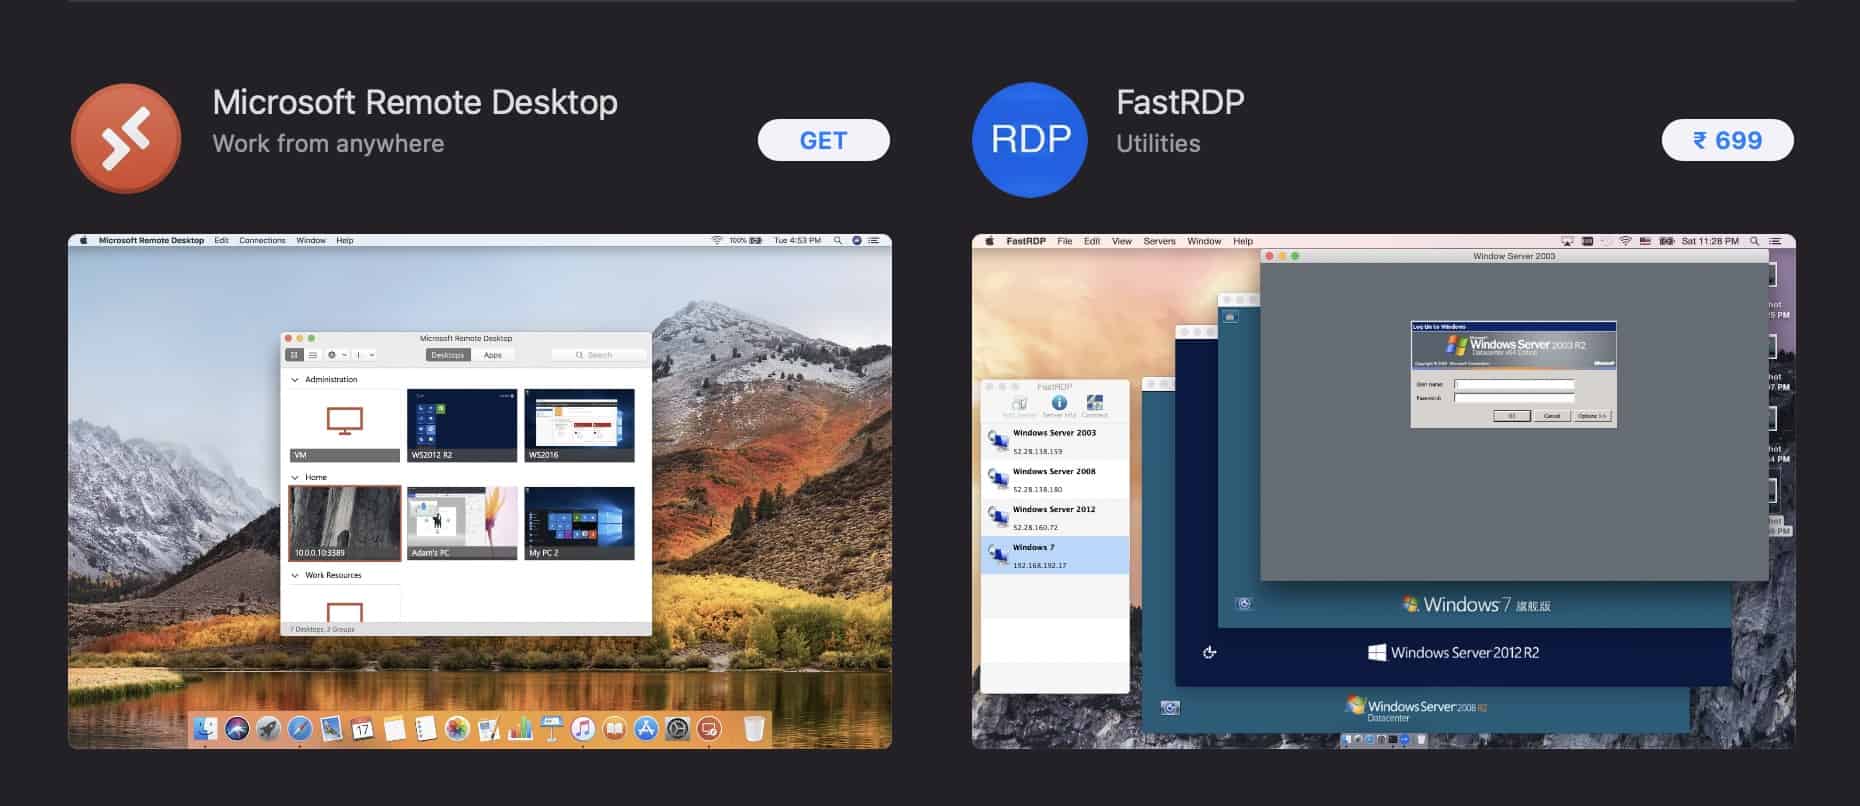 How to use the remote desktop on the Mac